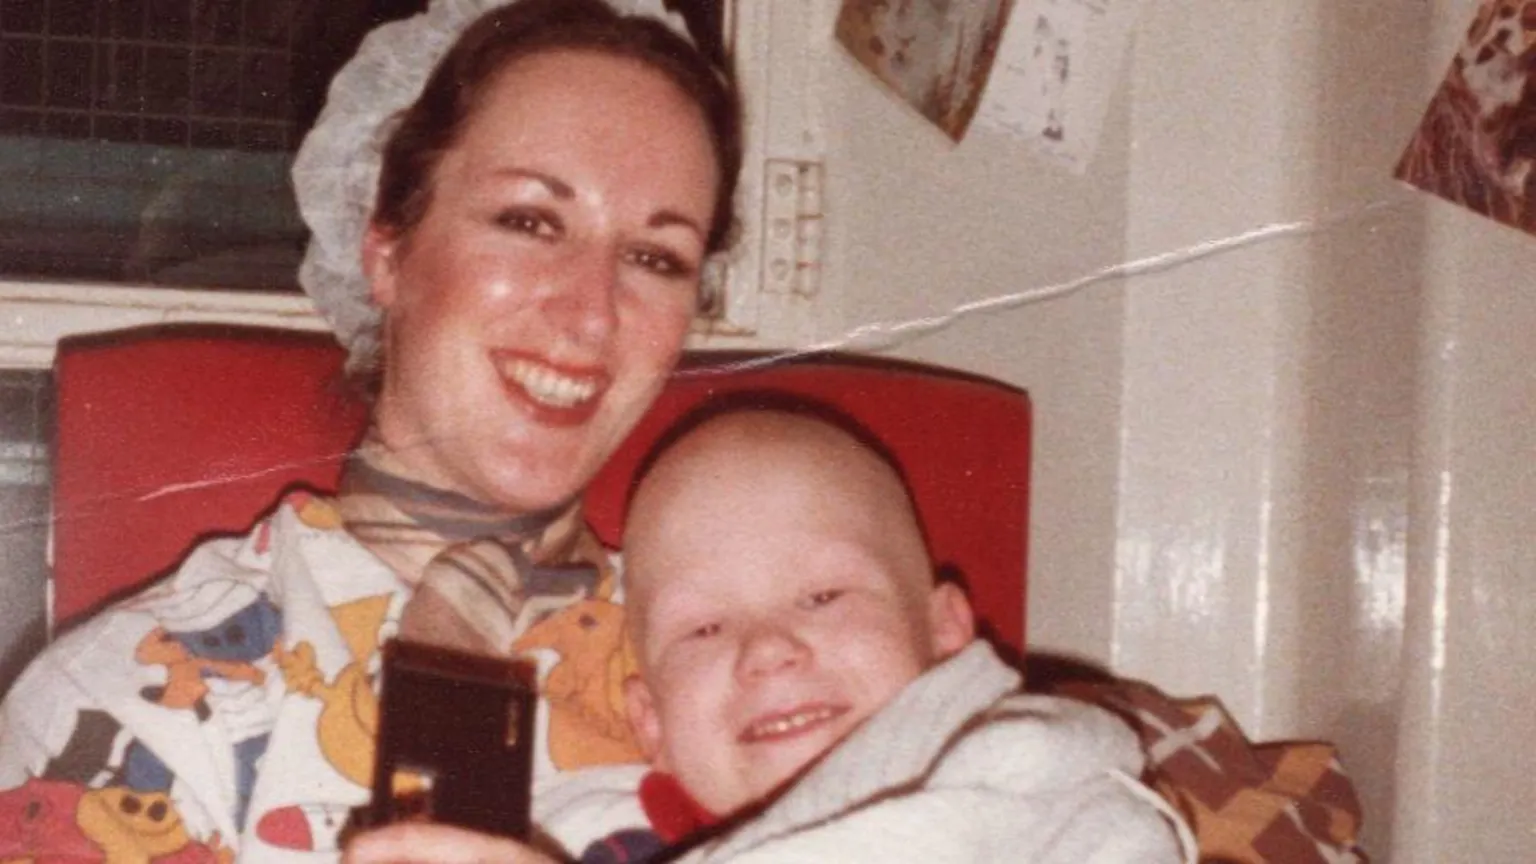 Mother with terminally ill son